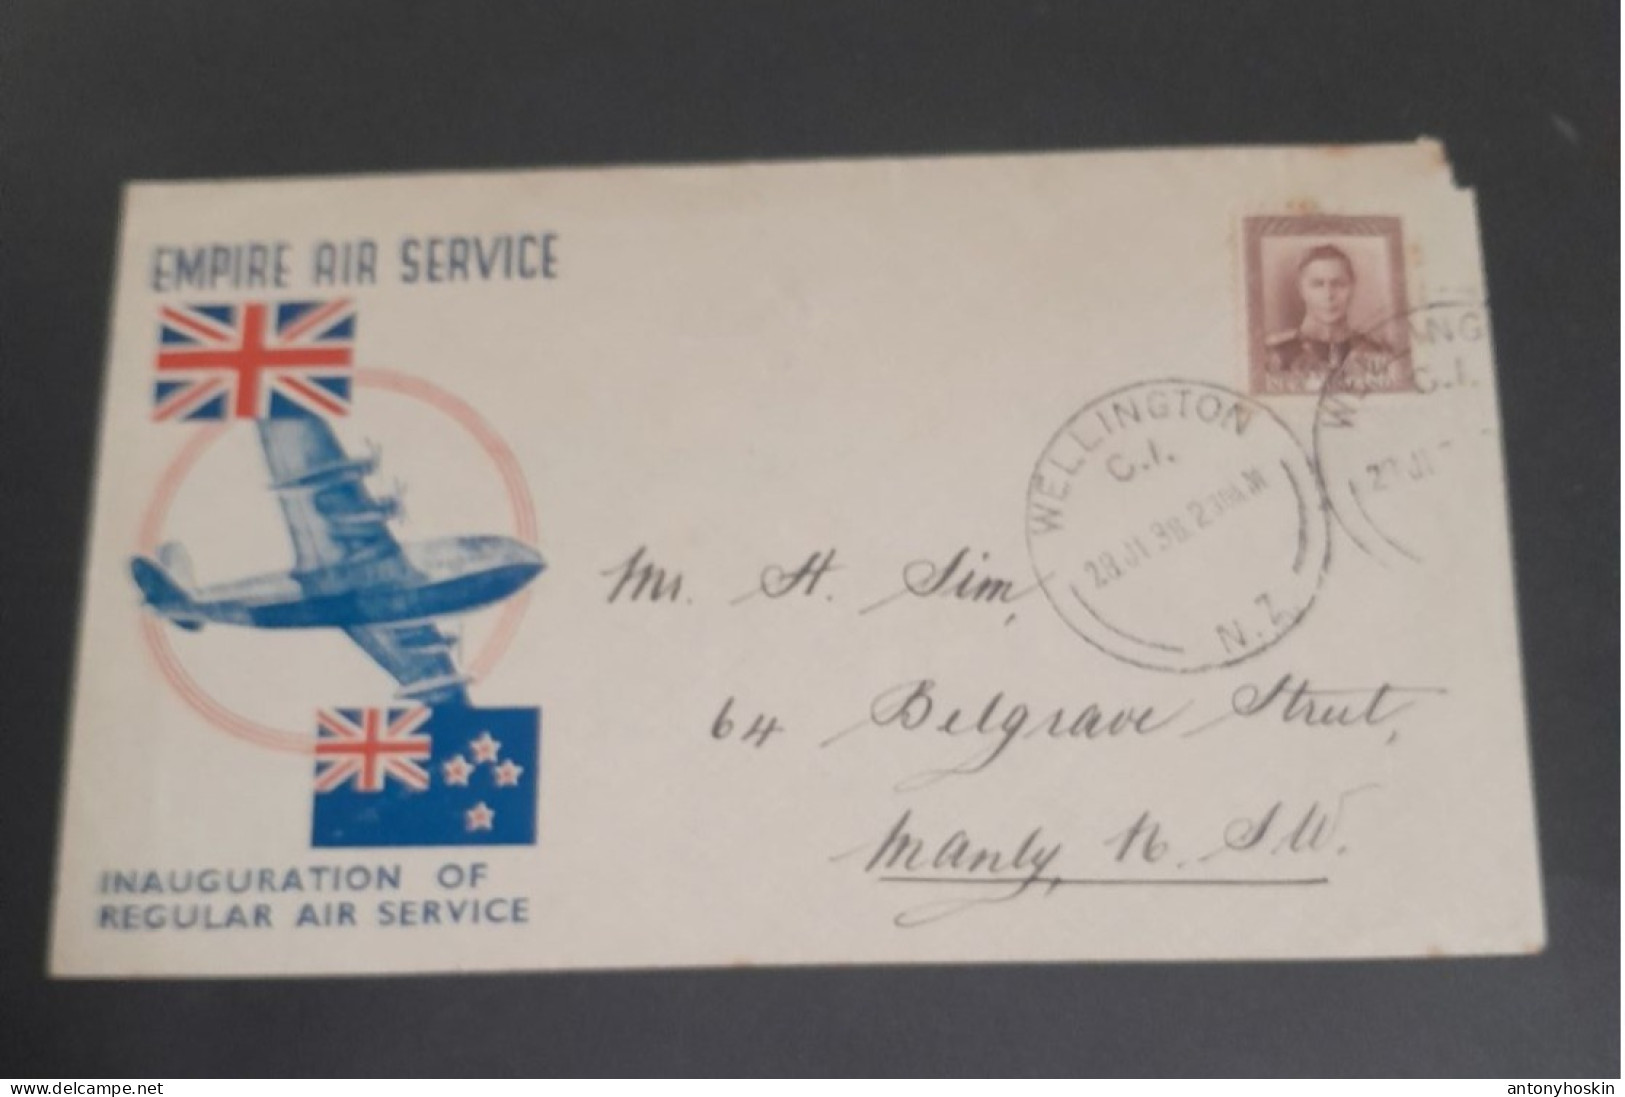 28 July 1938 Empire Air Service Inauguration Of Regular Air Service - Airmail